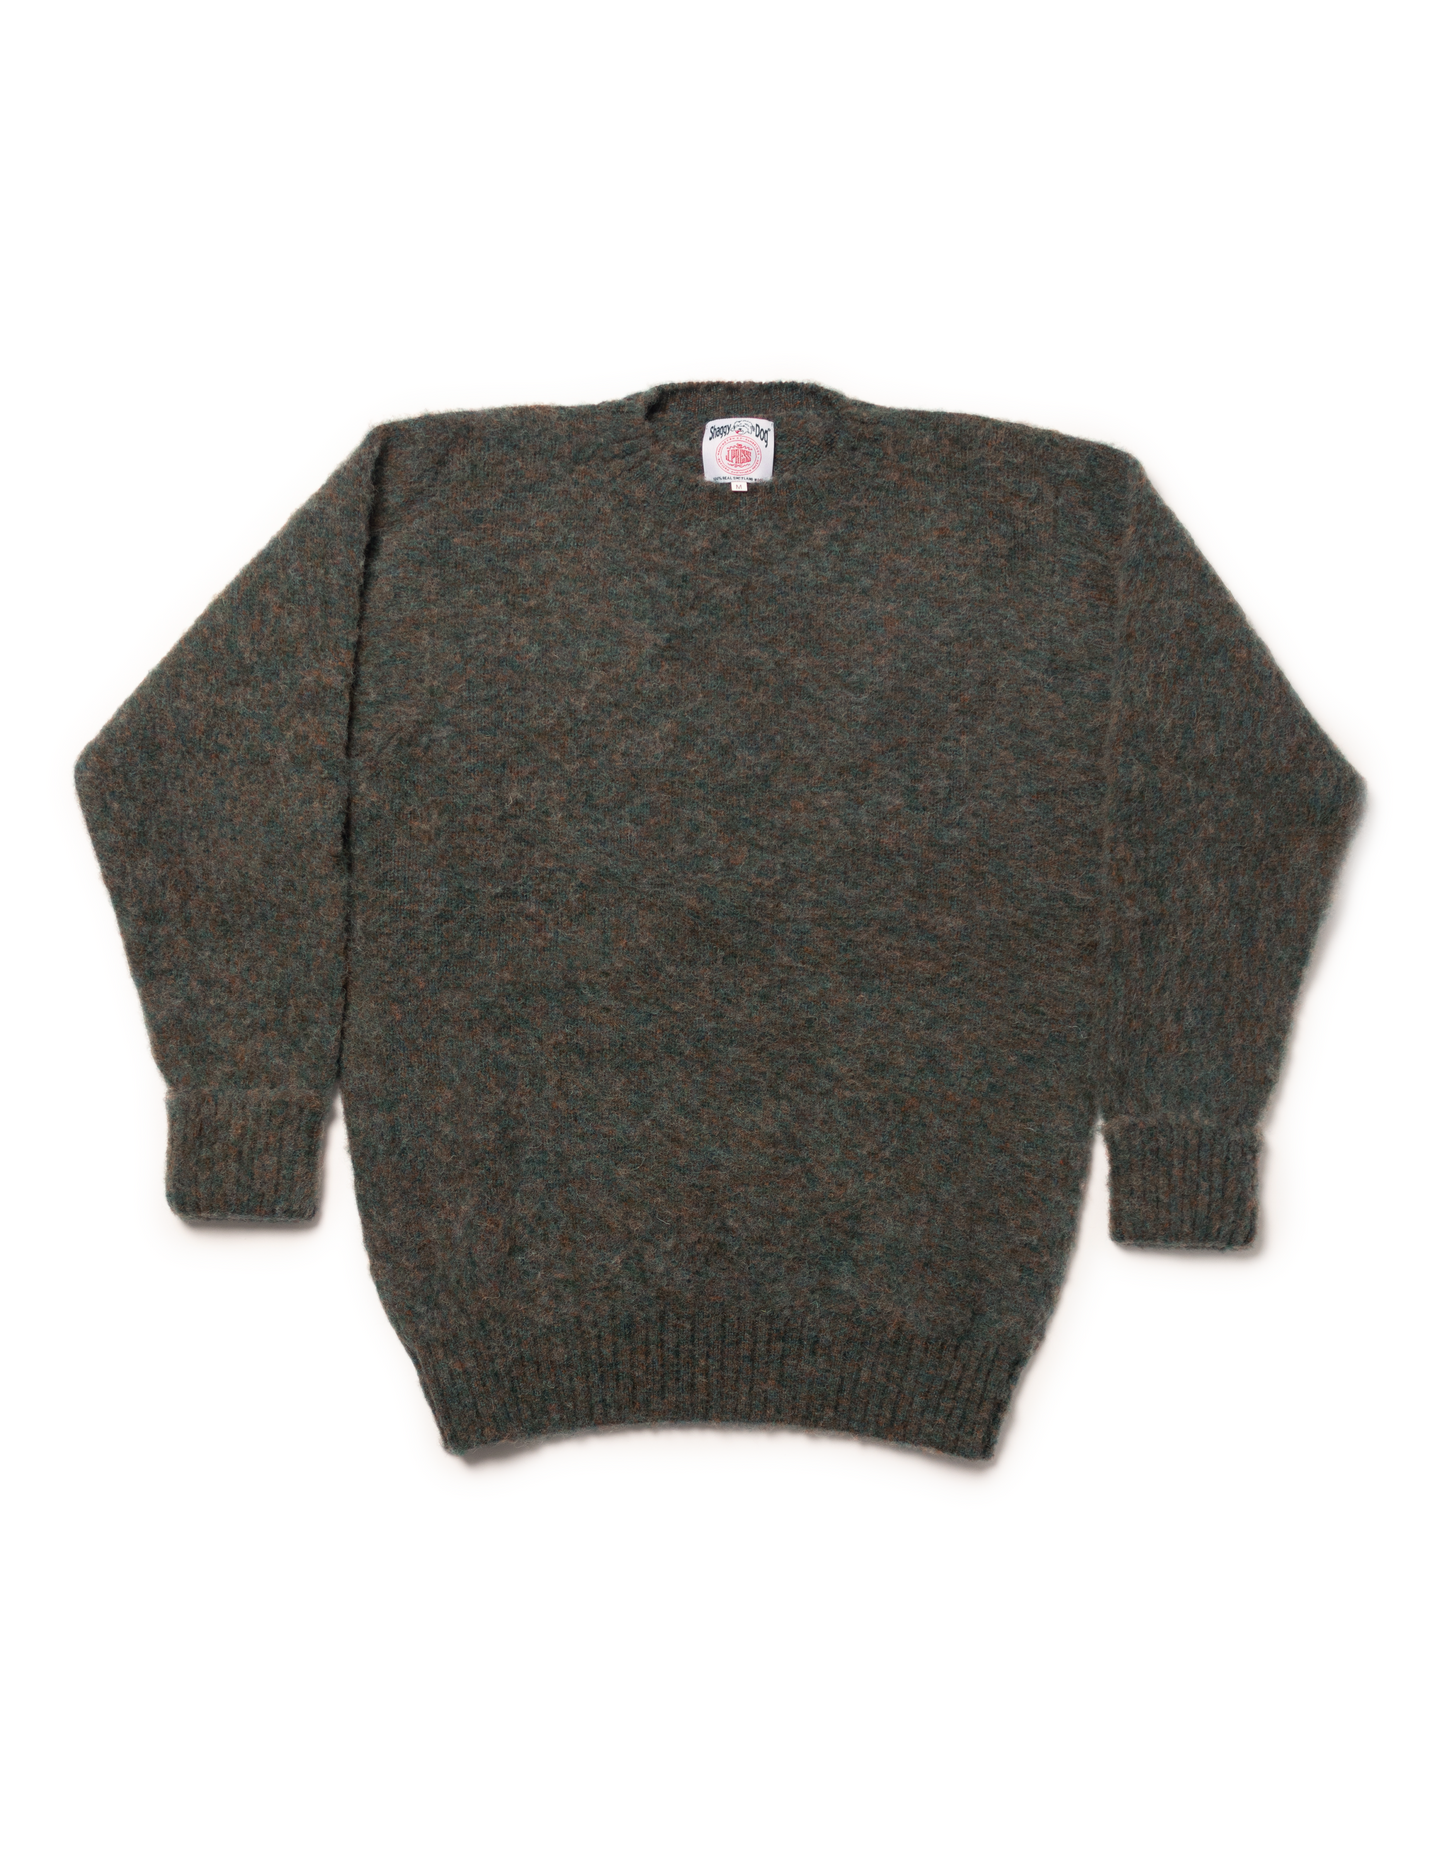 SHAGGY DOG SWEATER BLUE/BROWN - CLASSIC FIT